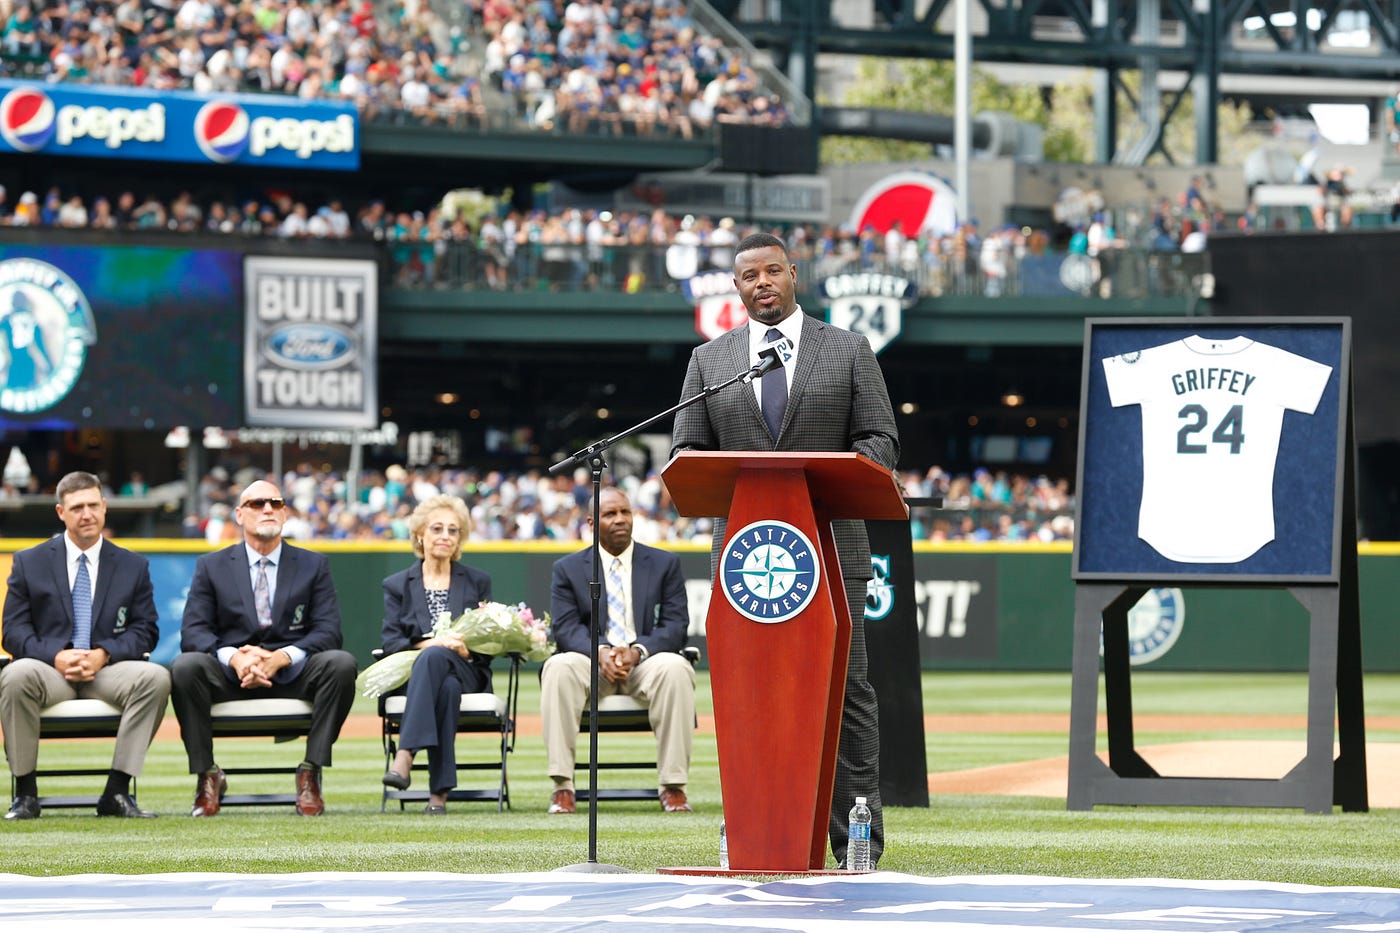 The Mariners Retire Ken Griffey Jr.'s Number 24, by Mariners PR